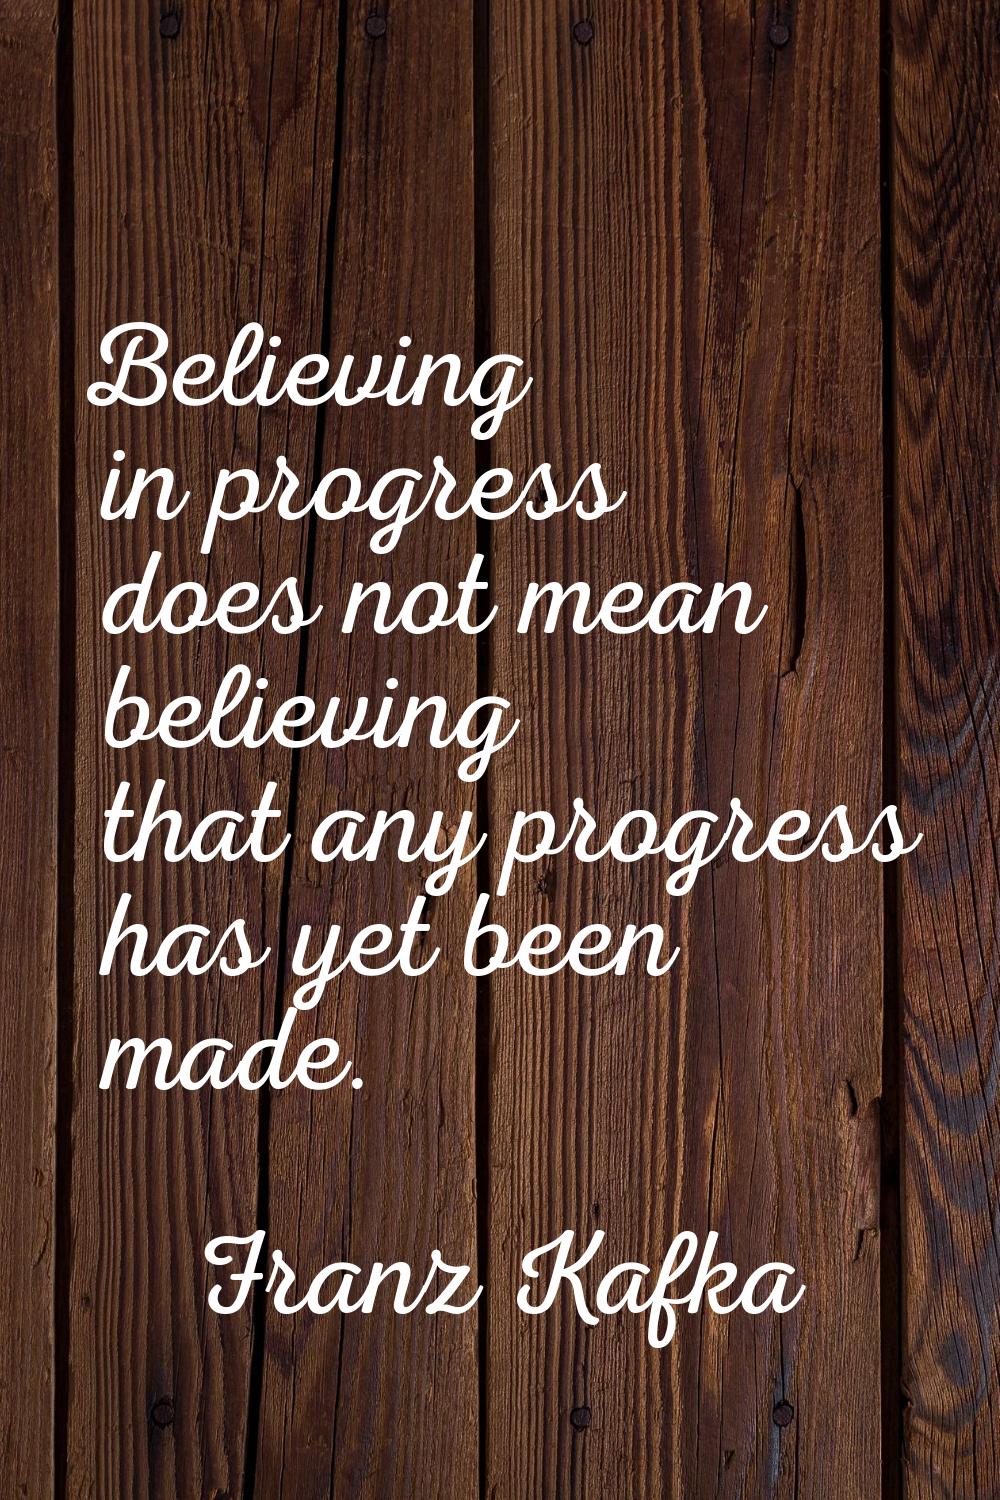 Believing in progress does not mean believing that any progress has yet been made.